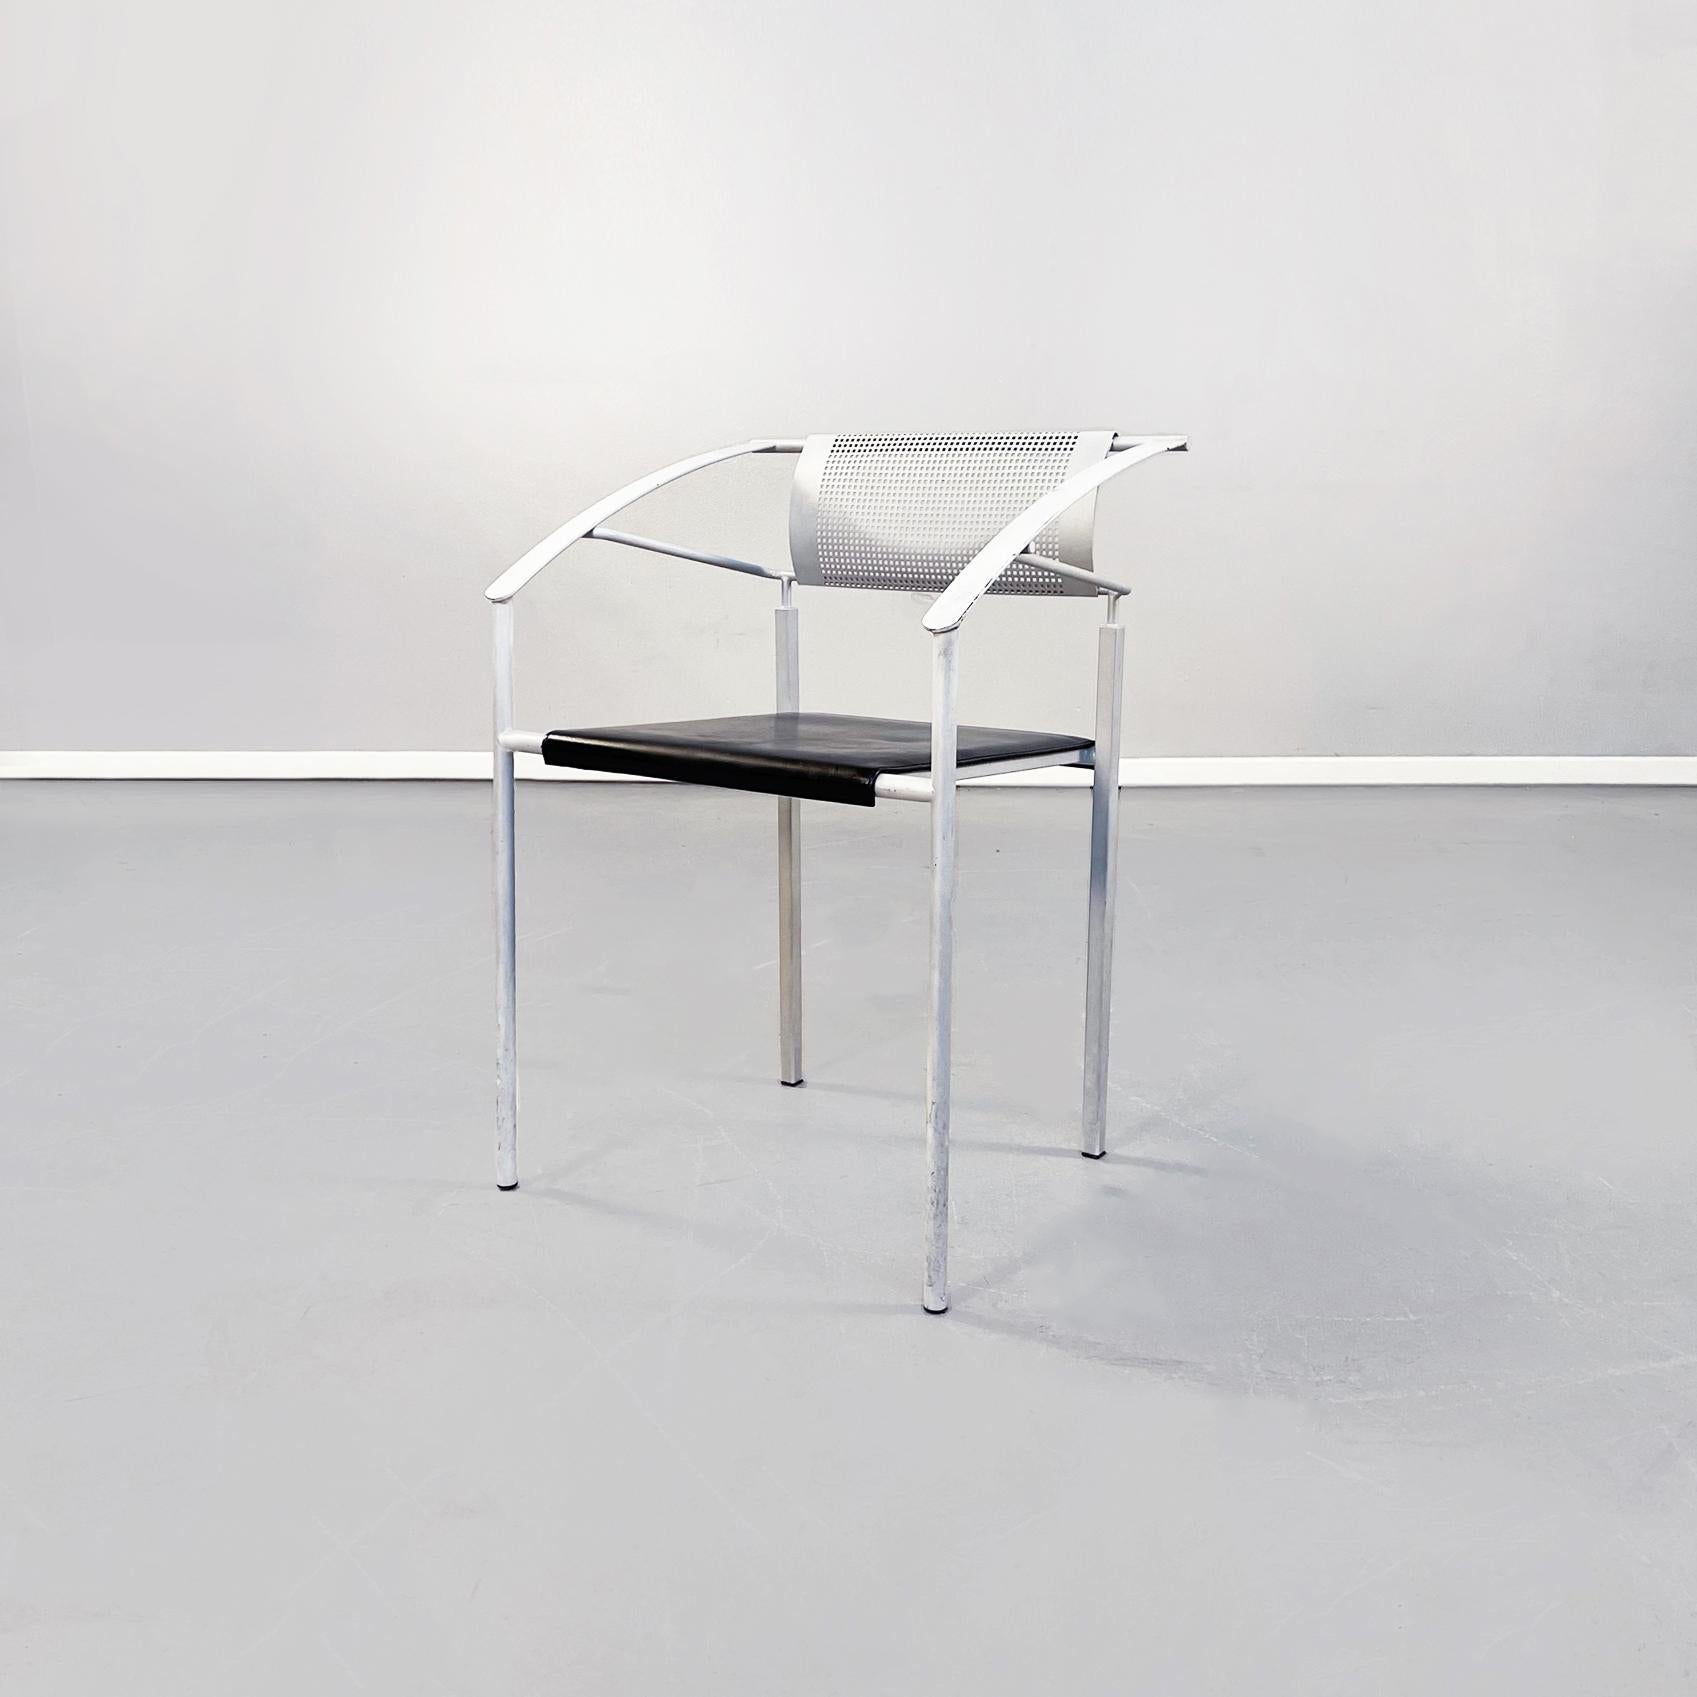 Italian mid-century White iron and black leather Carrè (VI) chairs by Fly Line, 1990s
Set of 4 Carrè (VI) model chairs with square seat in black leather. The structure is in white painted iron. The back is rectangular, slightly curved and